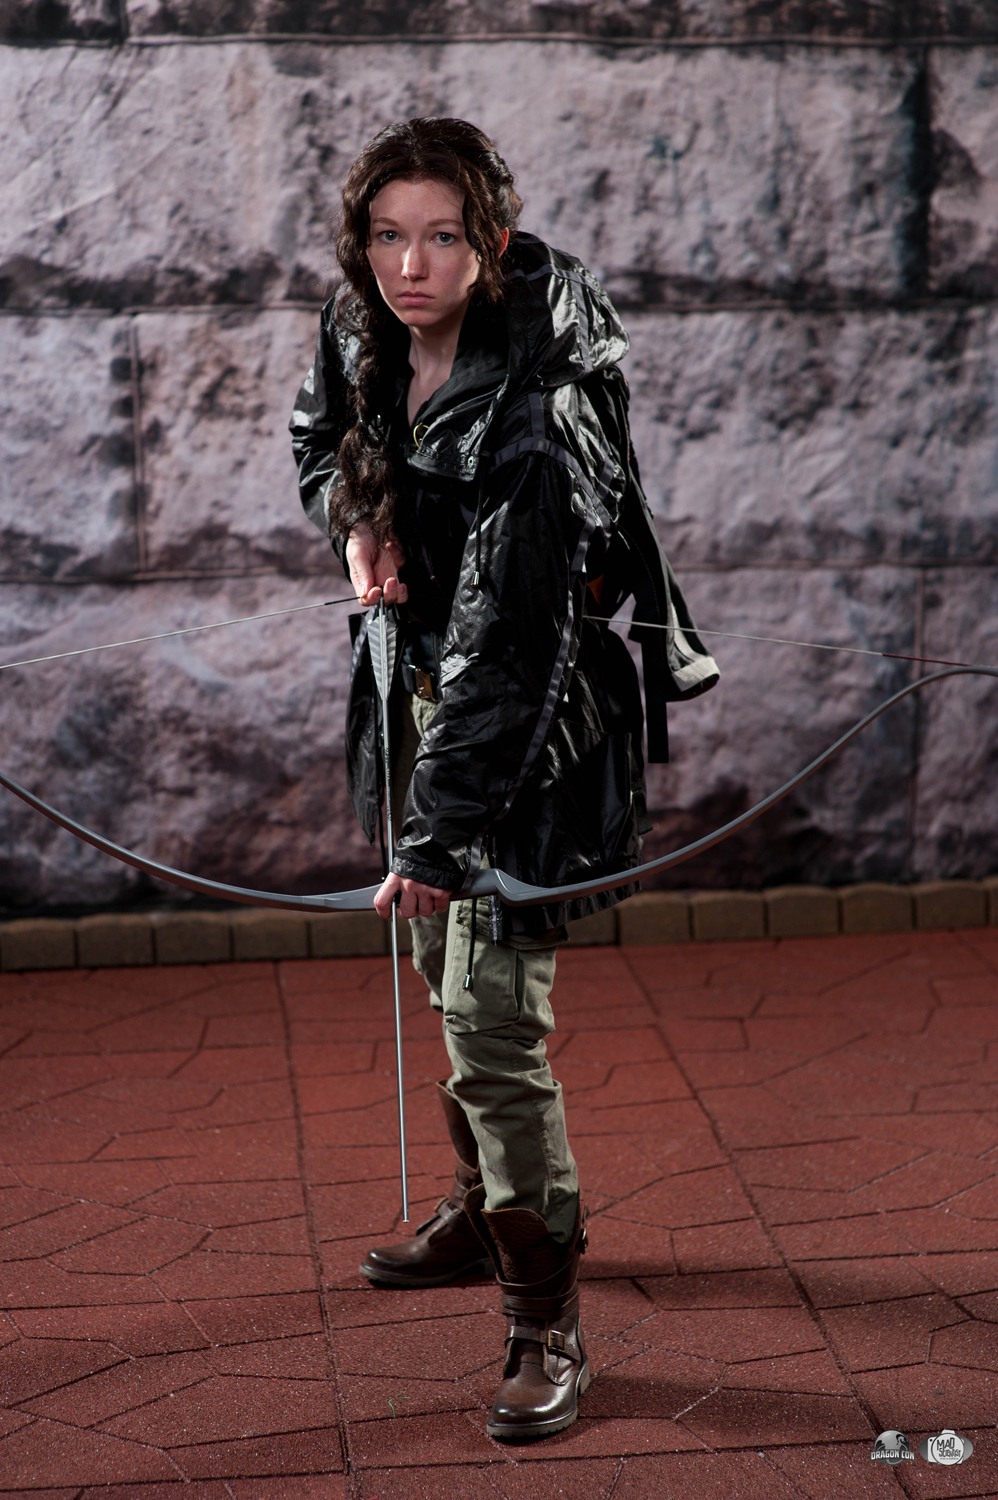 Katniss Everdeen Arena costume from the Hunger Games Photo by Bryan  Humphrey | RPF Costume and Prop Maker Community